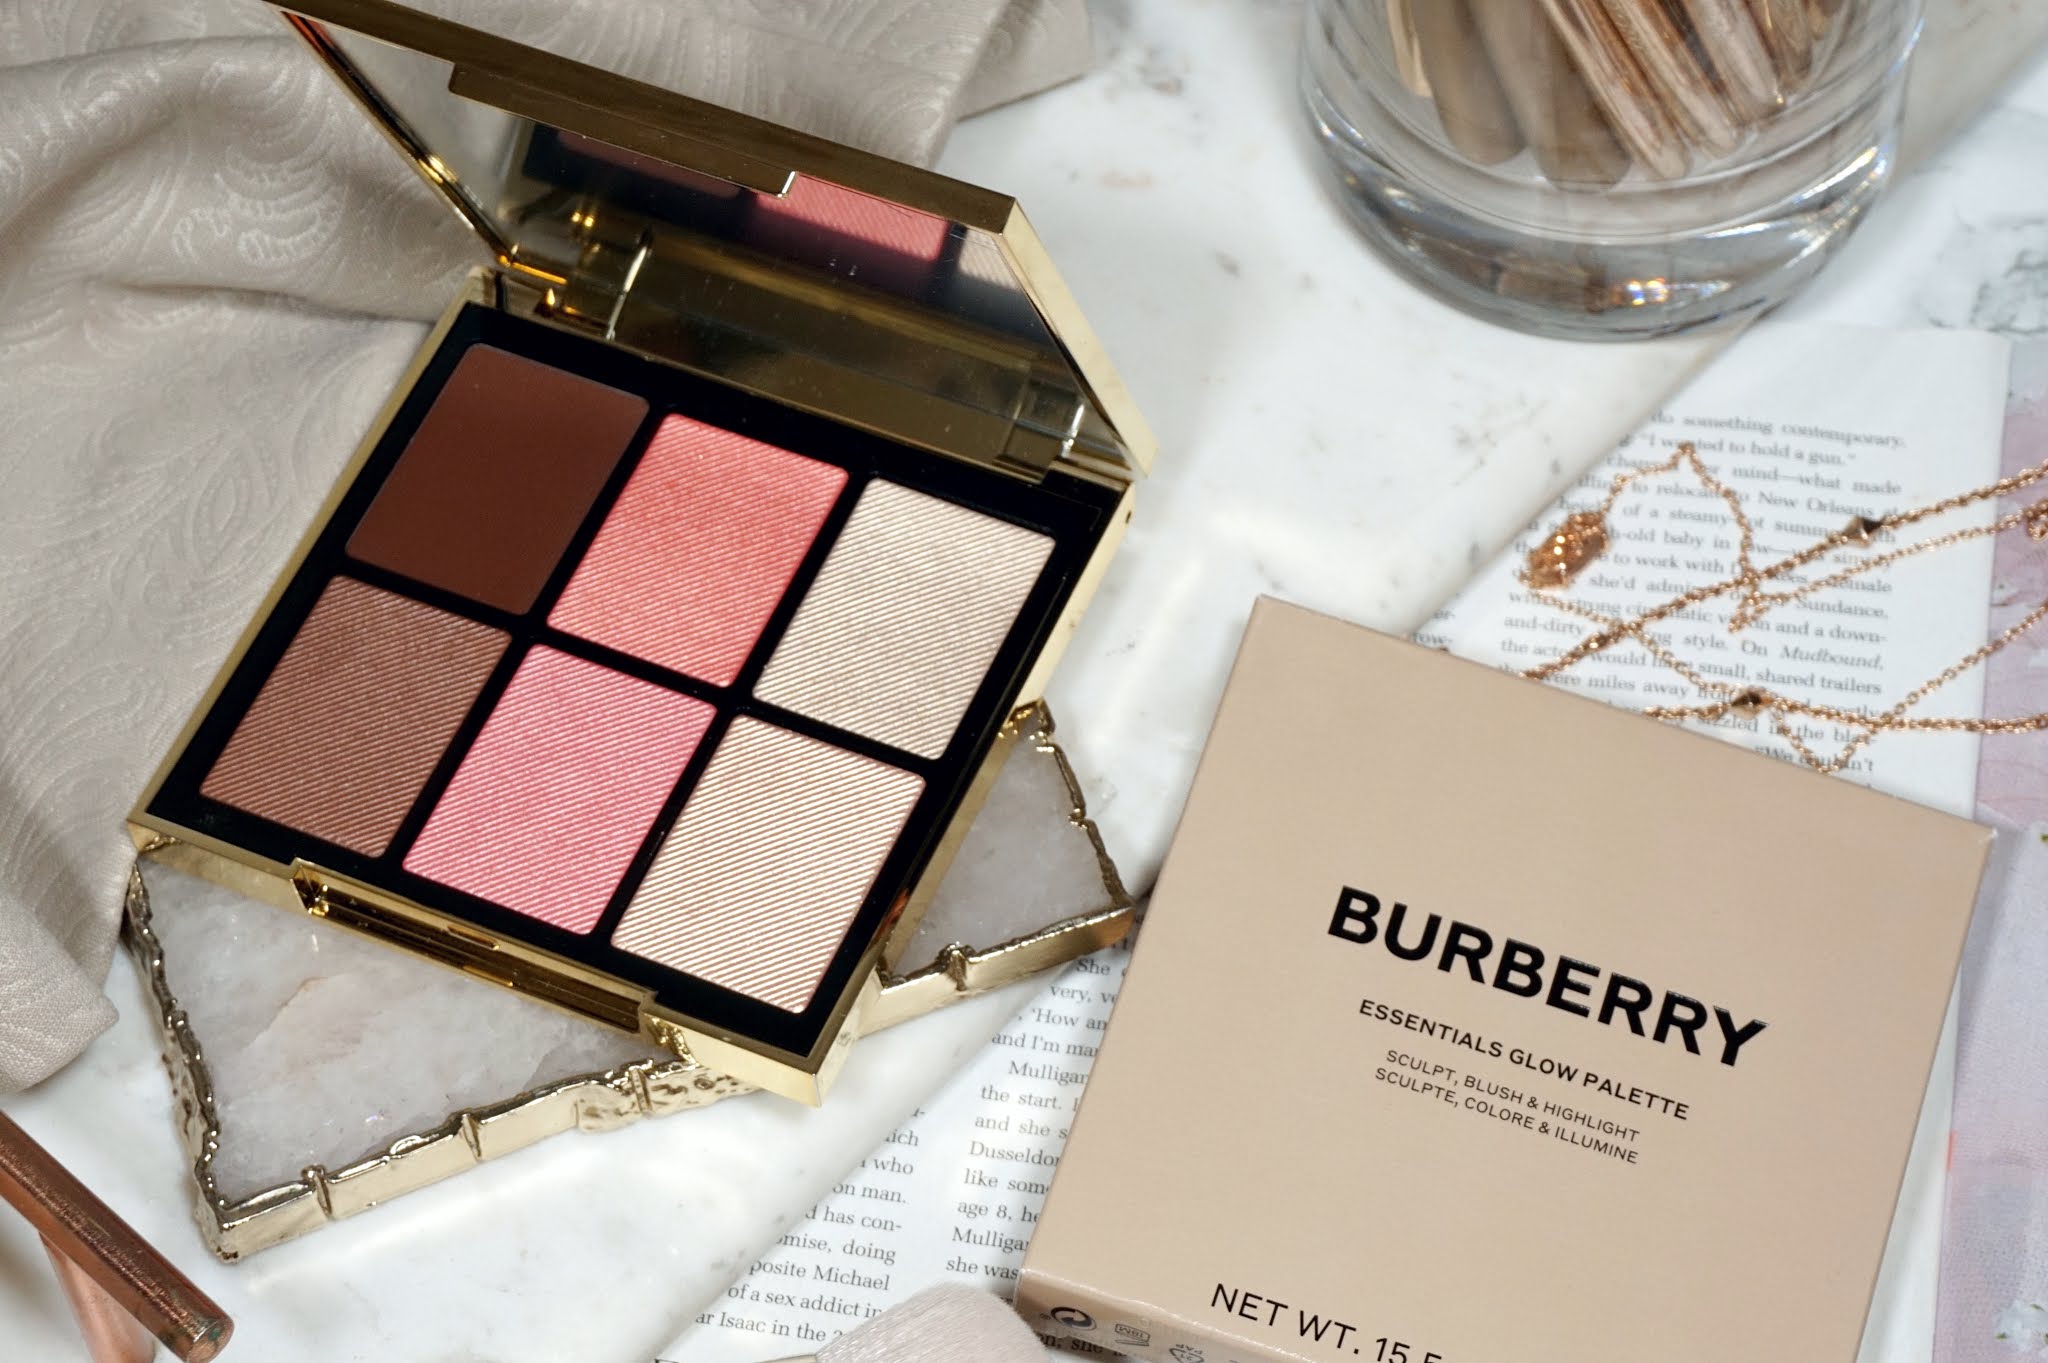 Burberry Essentials Glow Palette - 02 Medium to Dark Review and Swatches